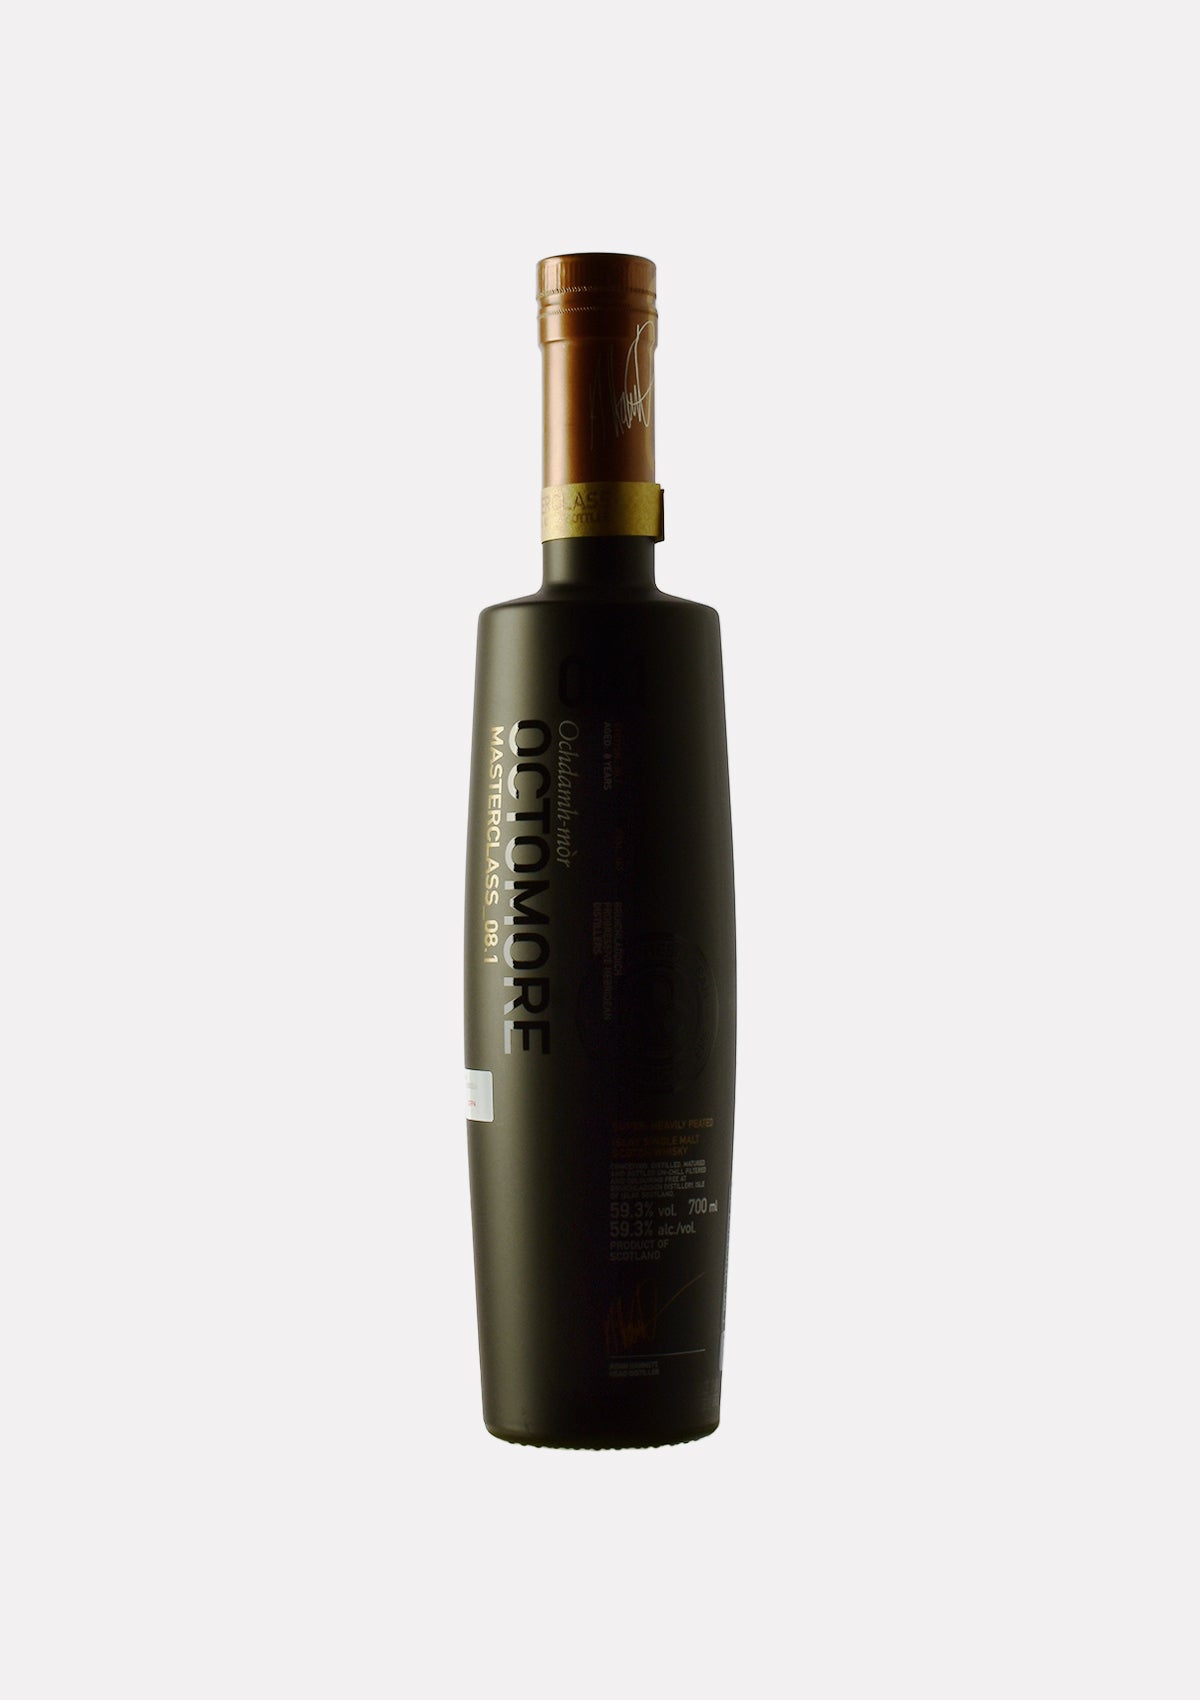 Octomore 08.1 167 ppm